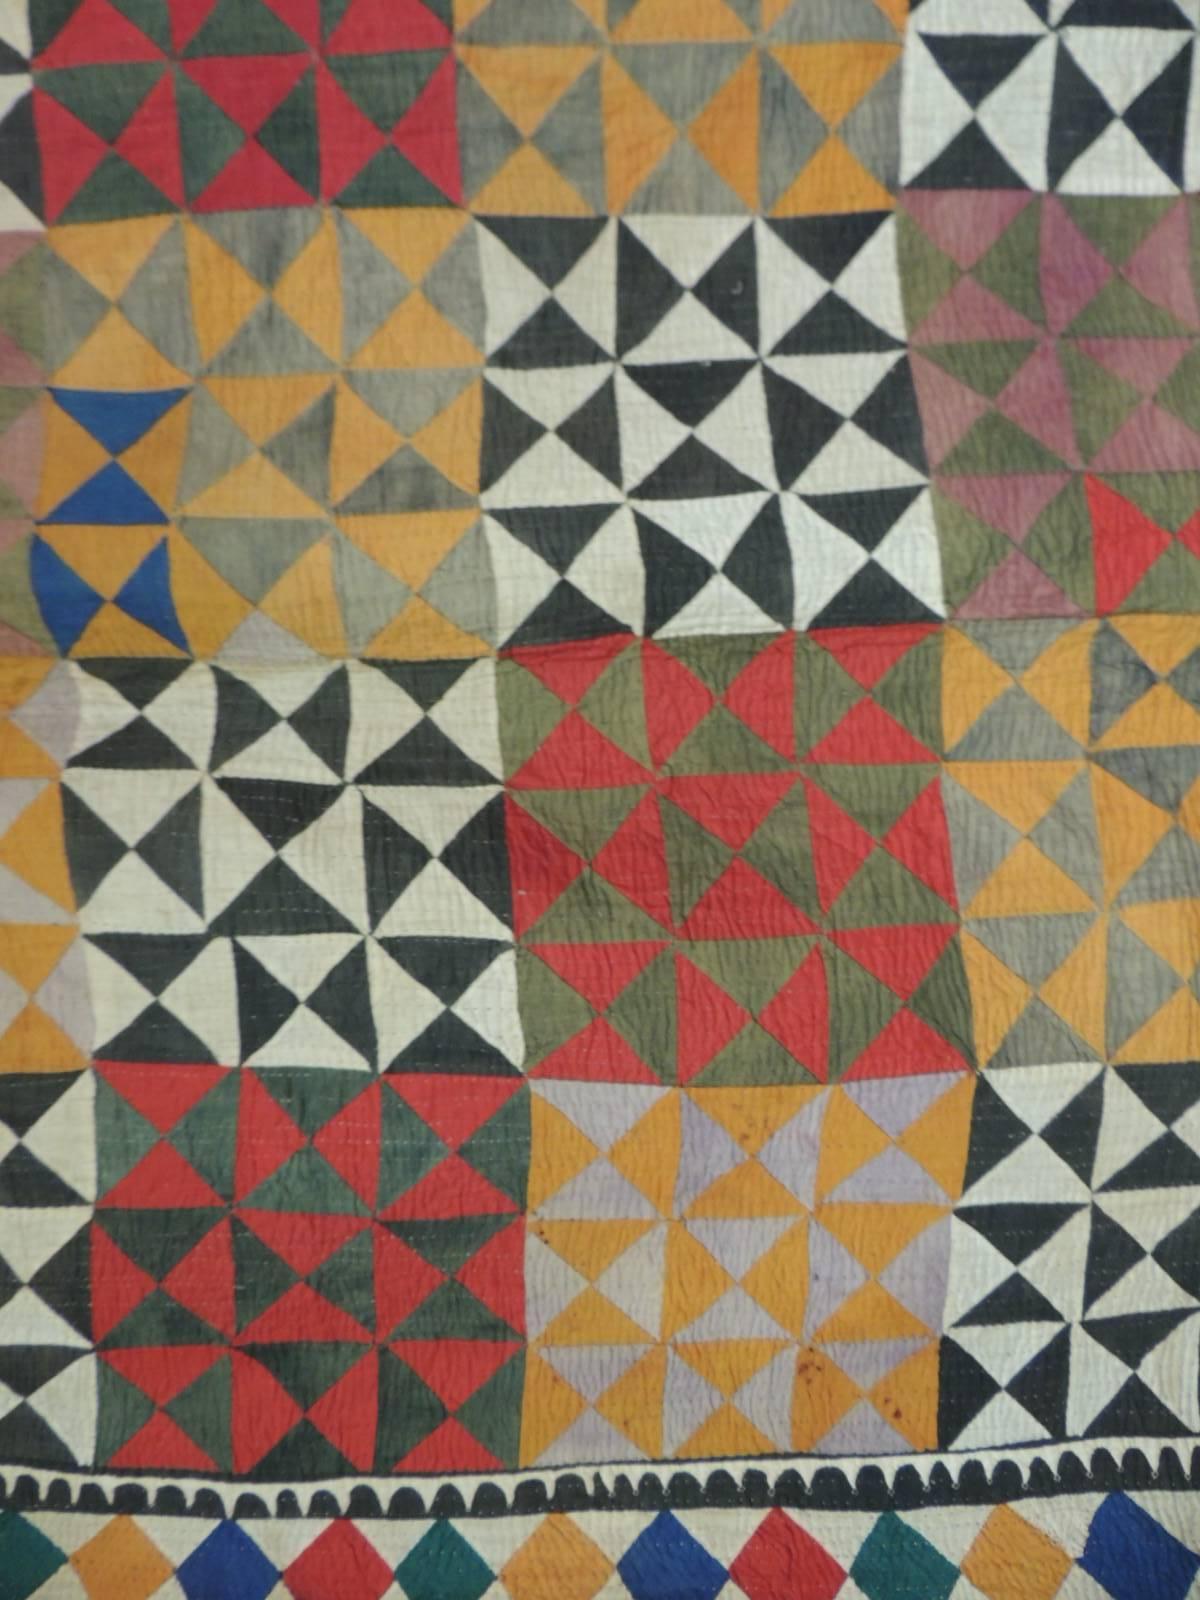 Offered by the Antique Textiles Galleries:
Antique patchwork Indian wedding ceremonial colorful blanket antique patchwork Indian wedding ceremonial colorful blanket small pieces of bright cotton have been hand-stitched to create this tapestry with